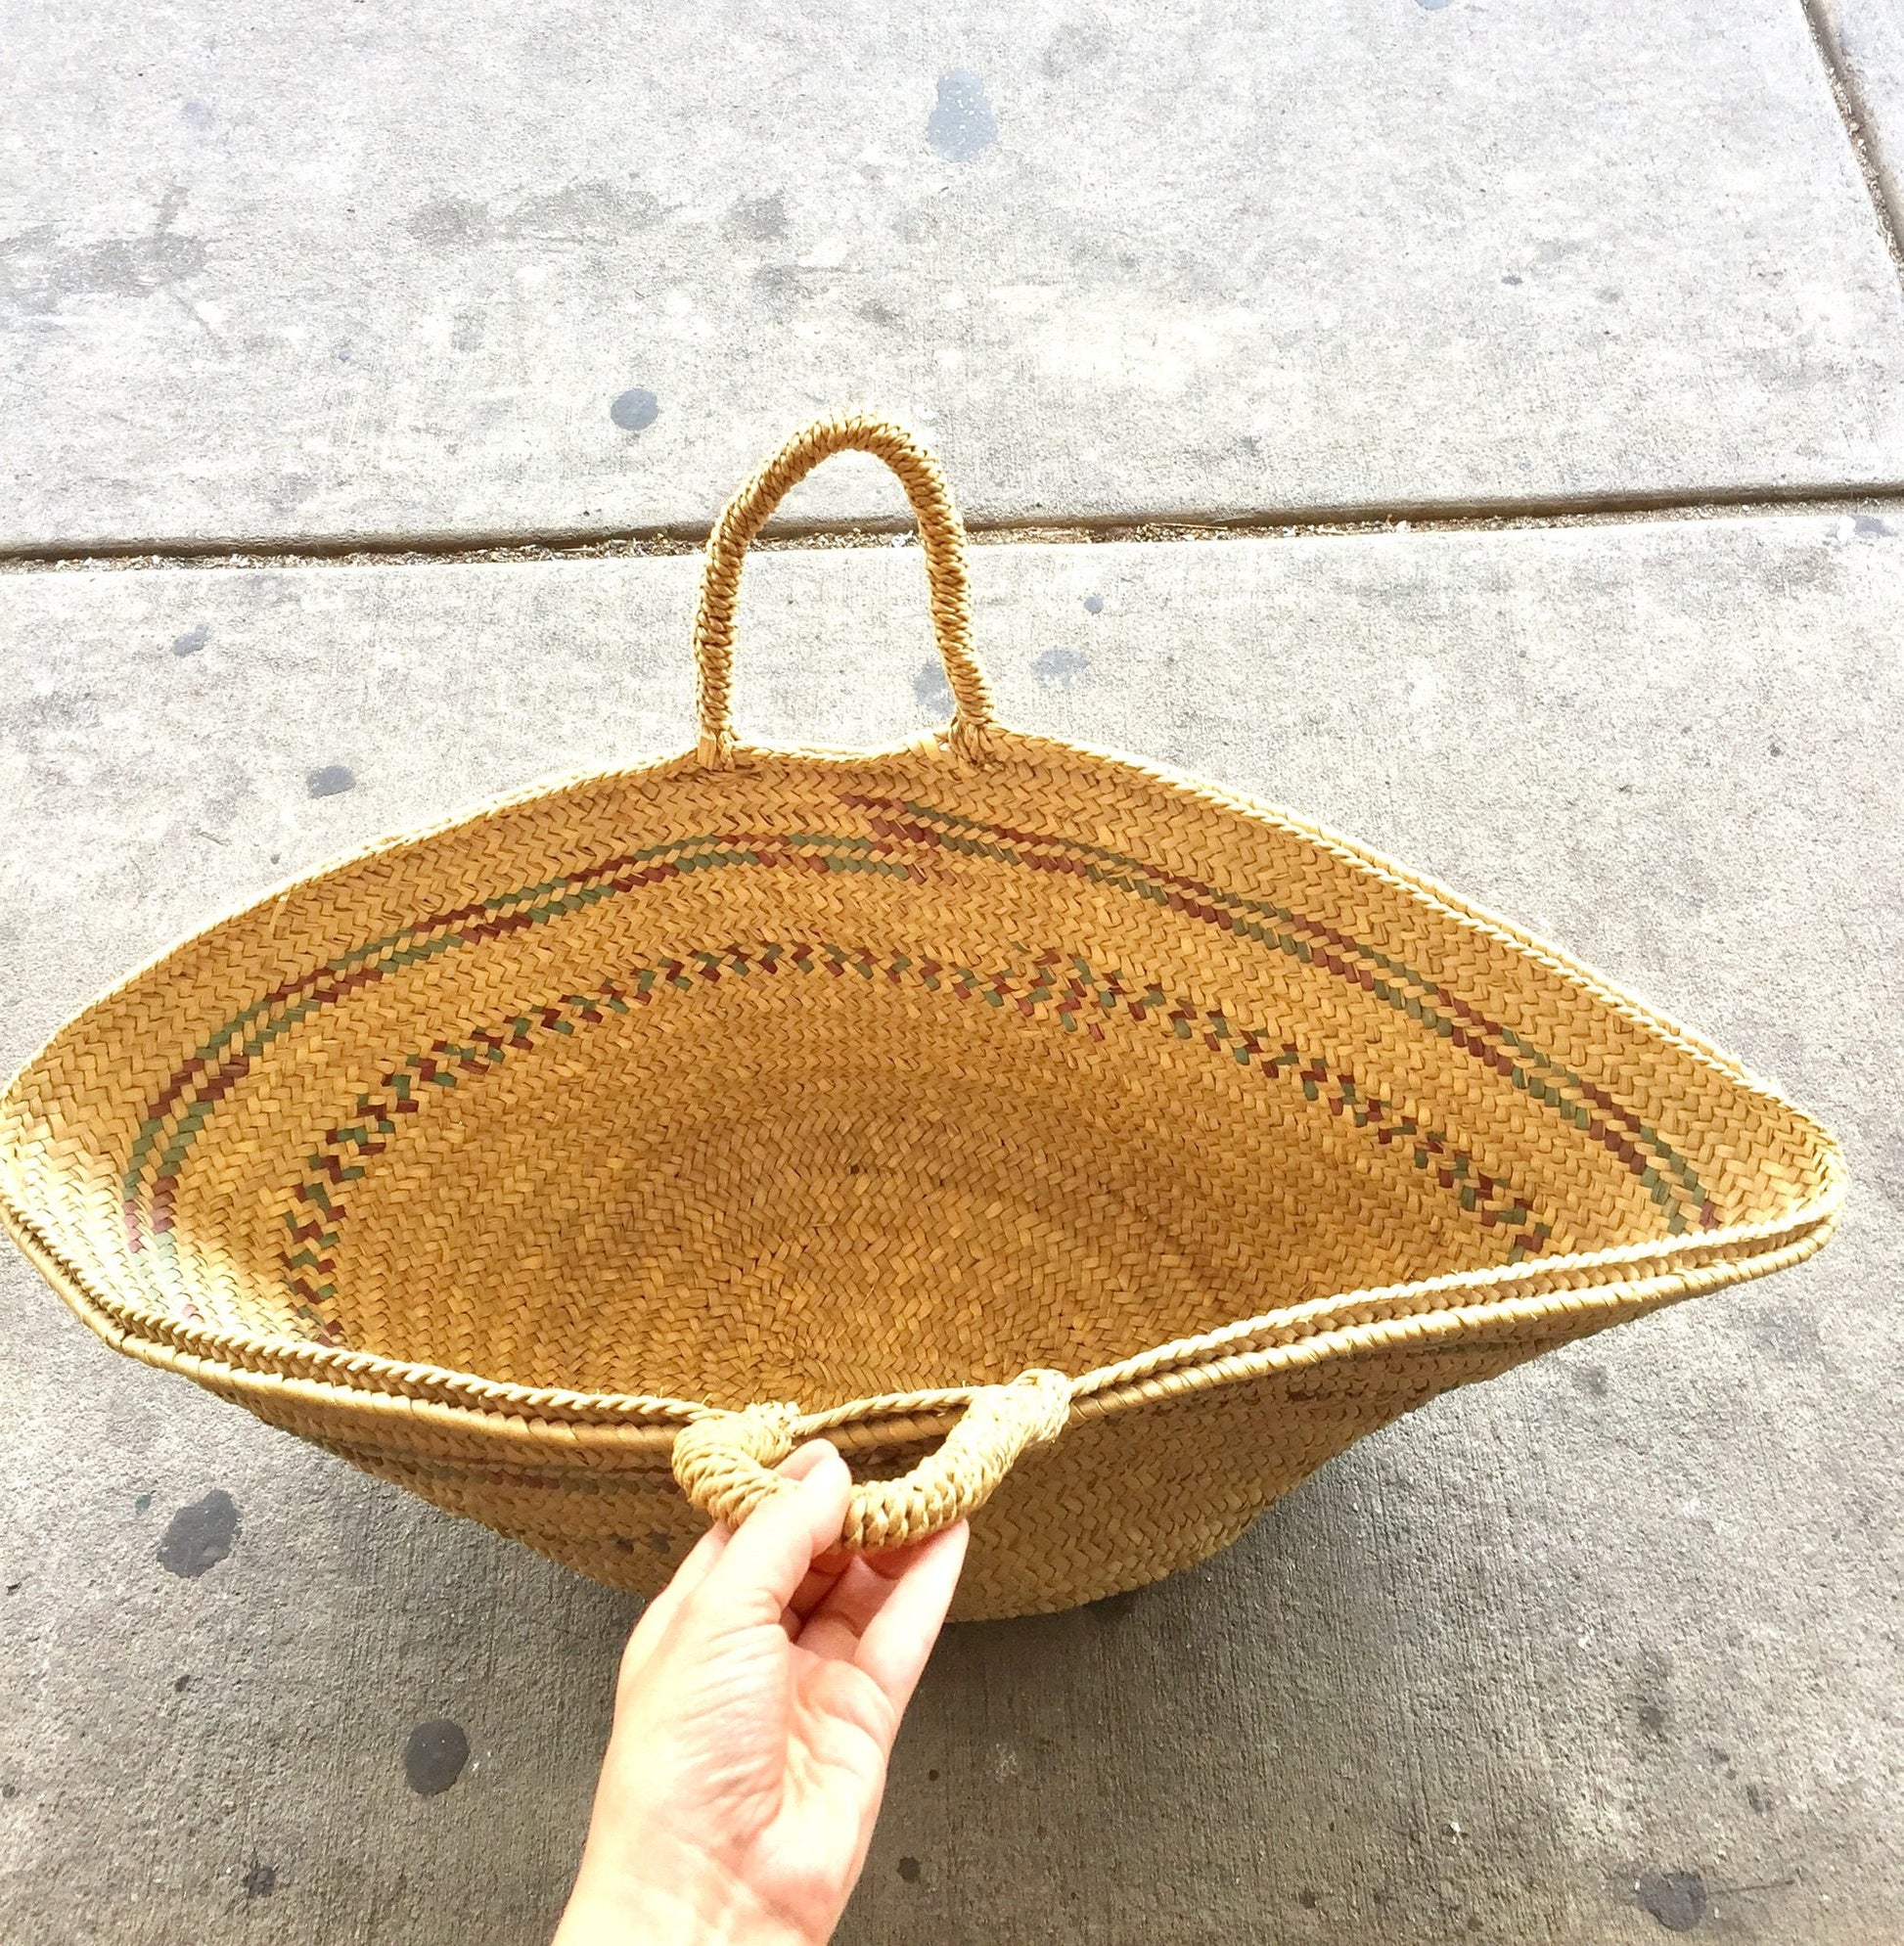 Hand holding a bohemian style straw woven beach bag with intricate design details, an ideal handmade purse or tote for shopping and a unique boho gift idea for her.